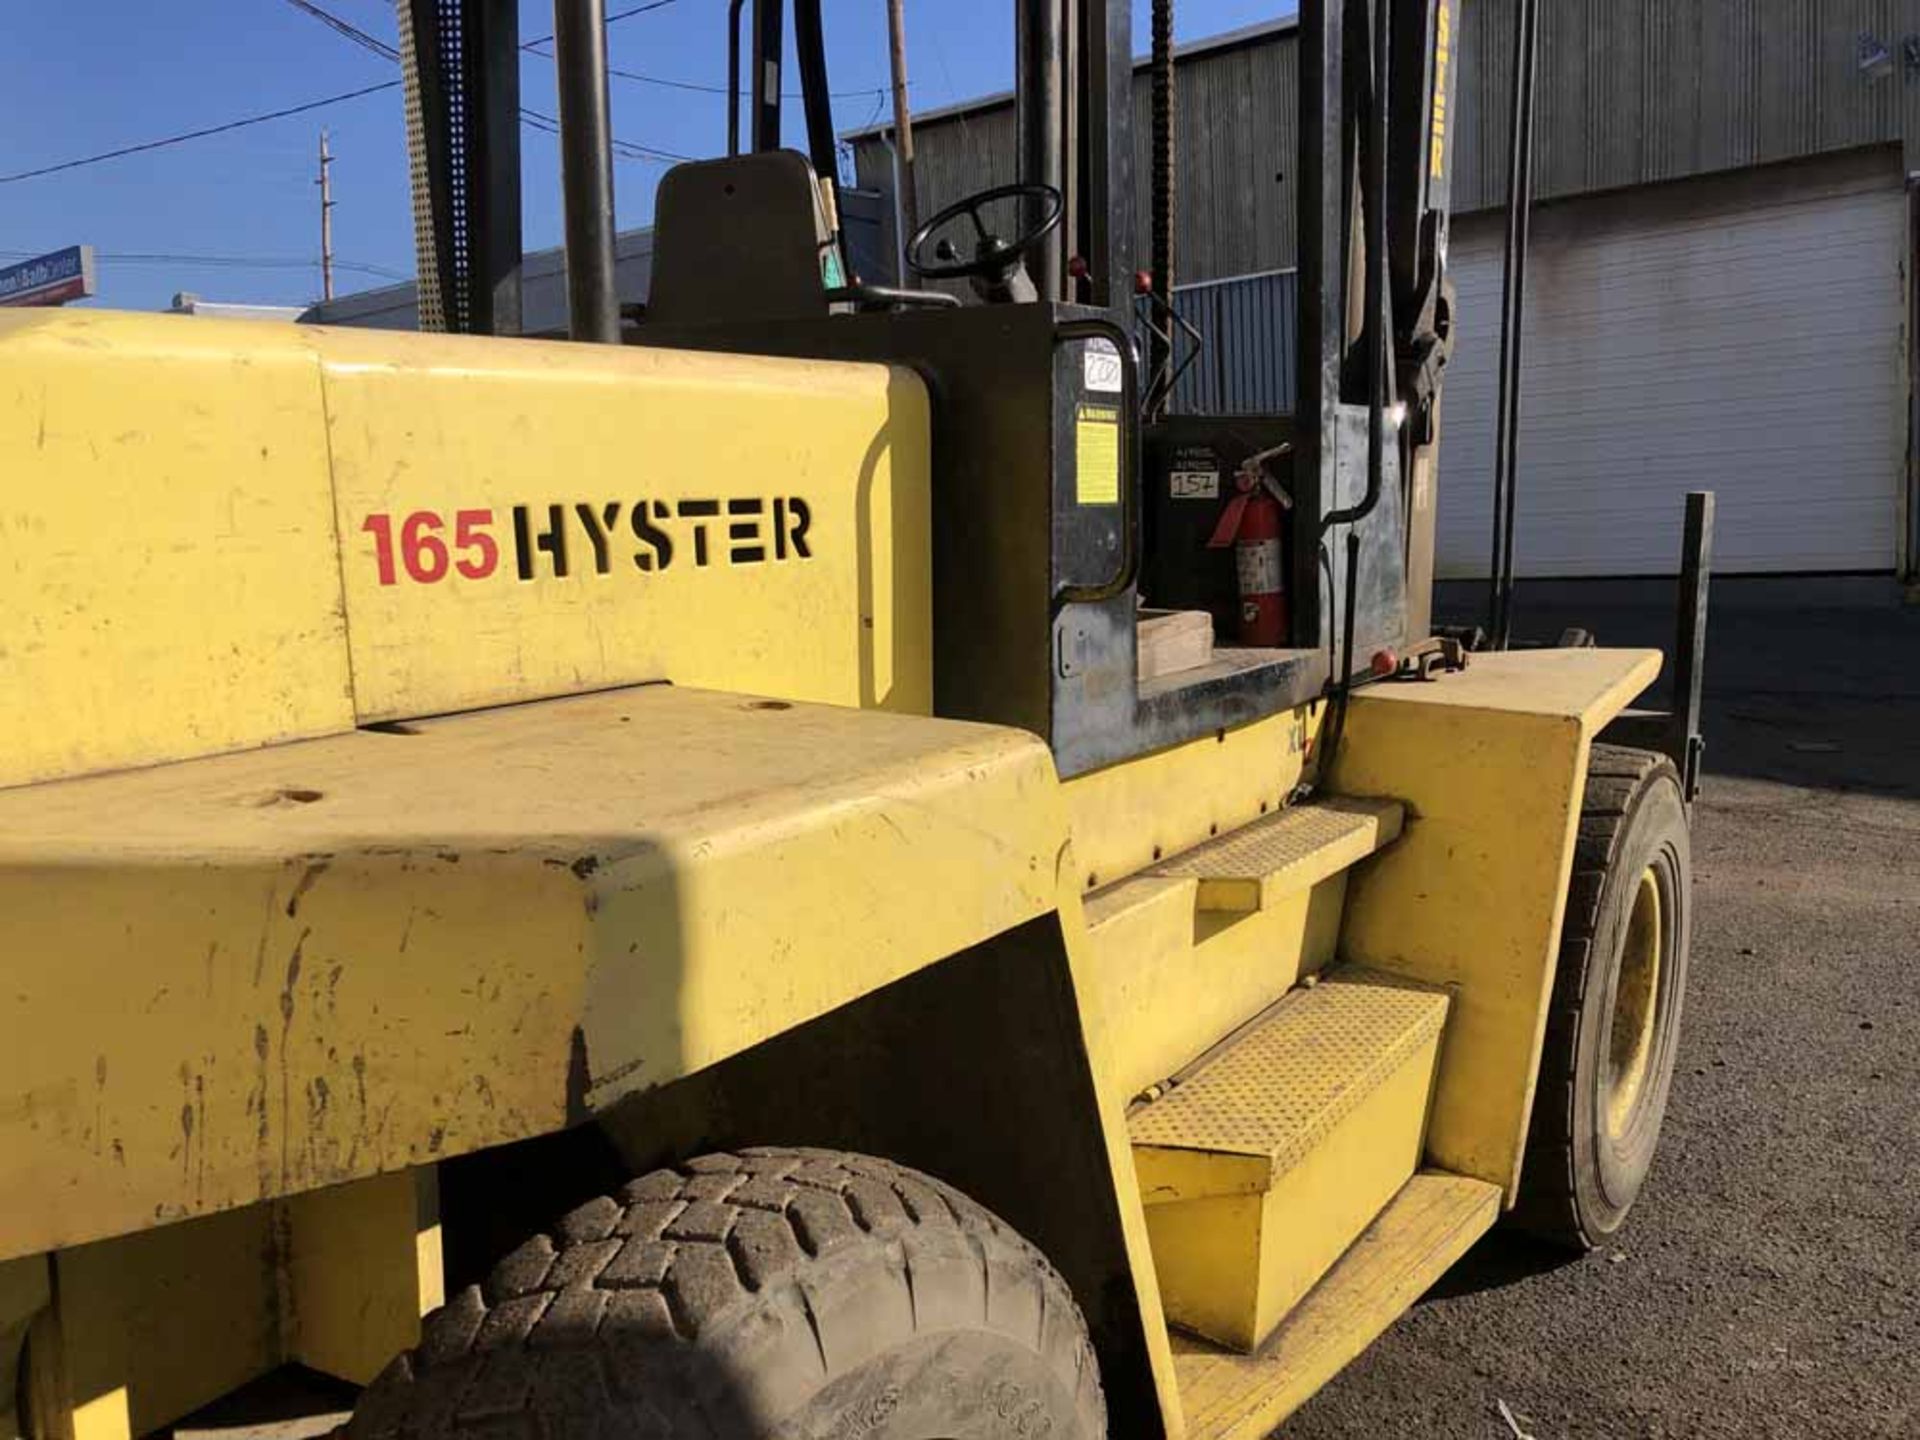 Hyster XL2, Forklift, 804 Hours,26,600 Pounds - Image 3 of 8